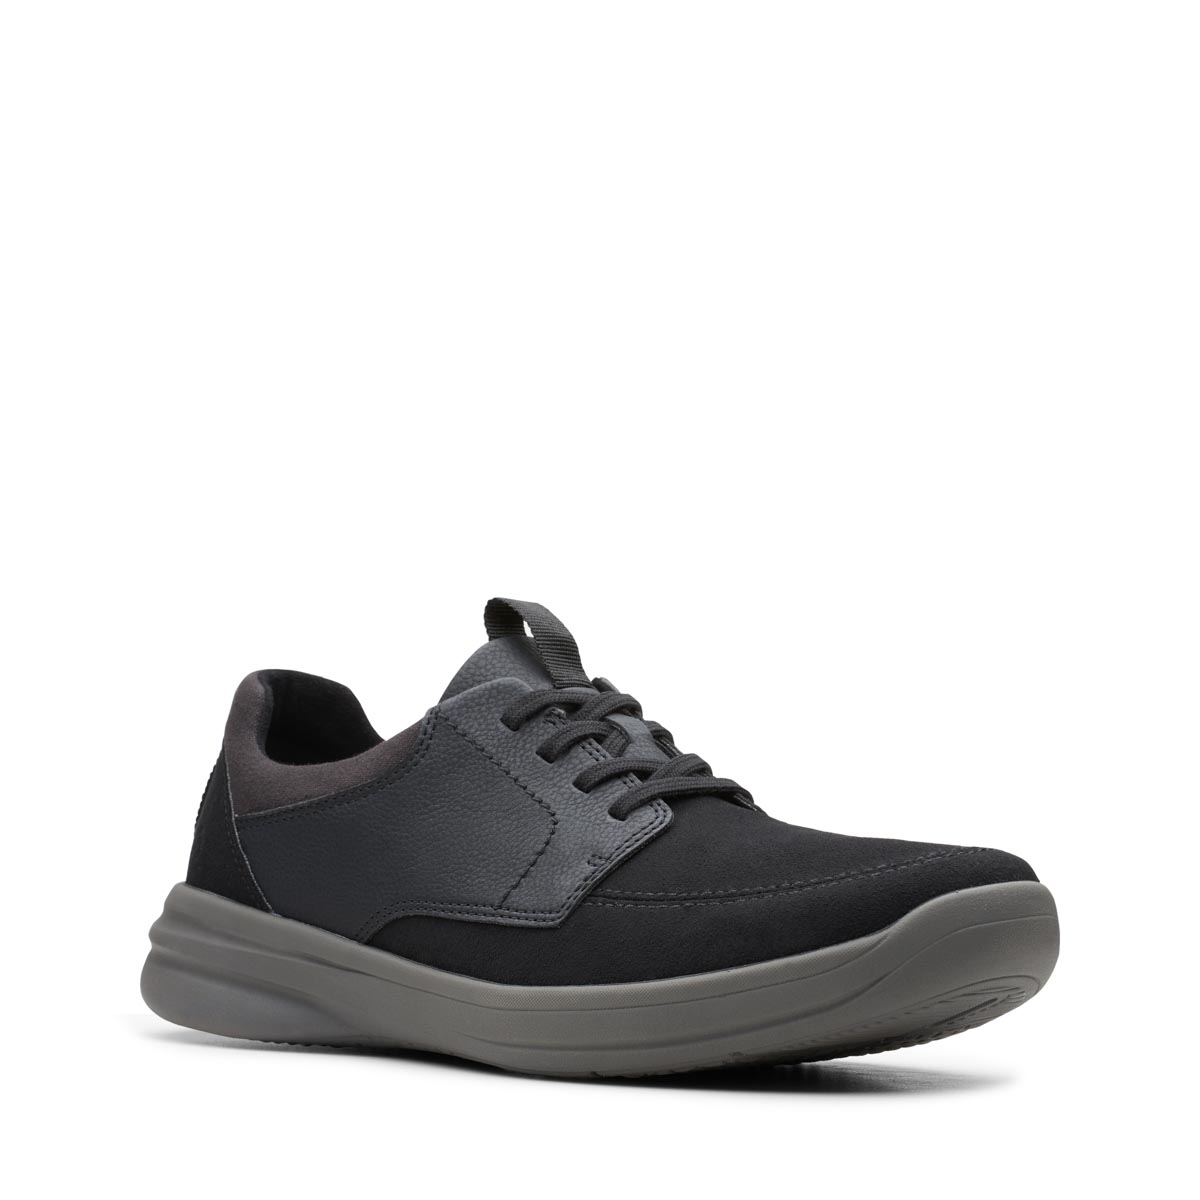 Fit Black leather casual shoes